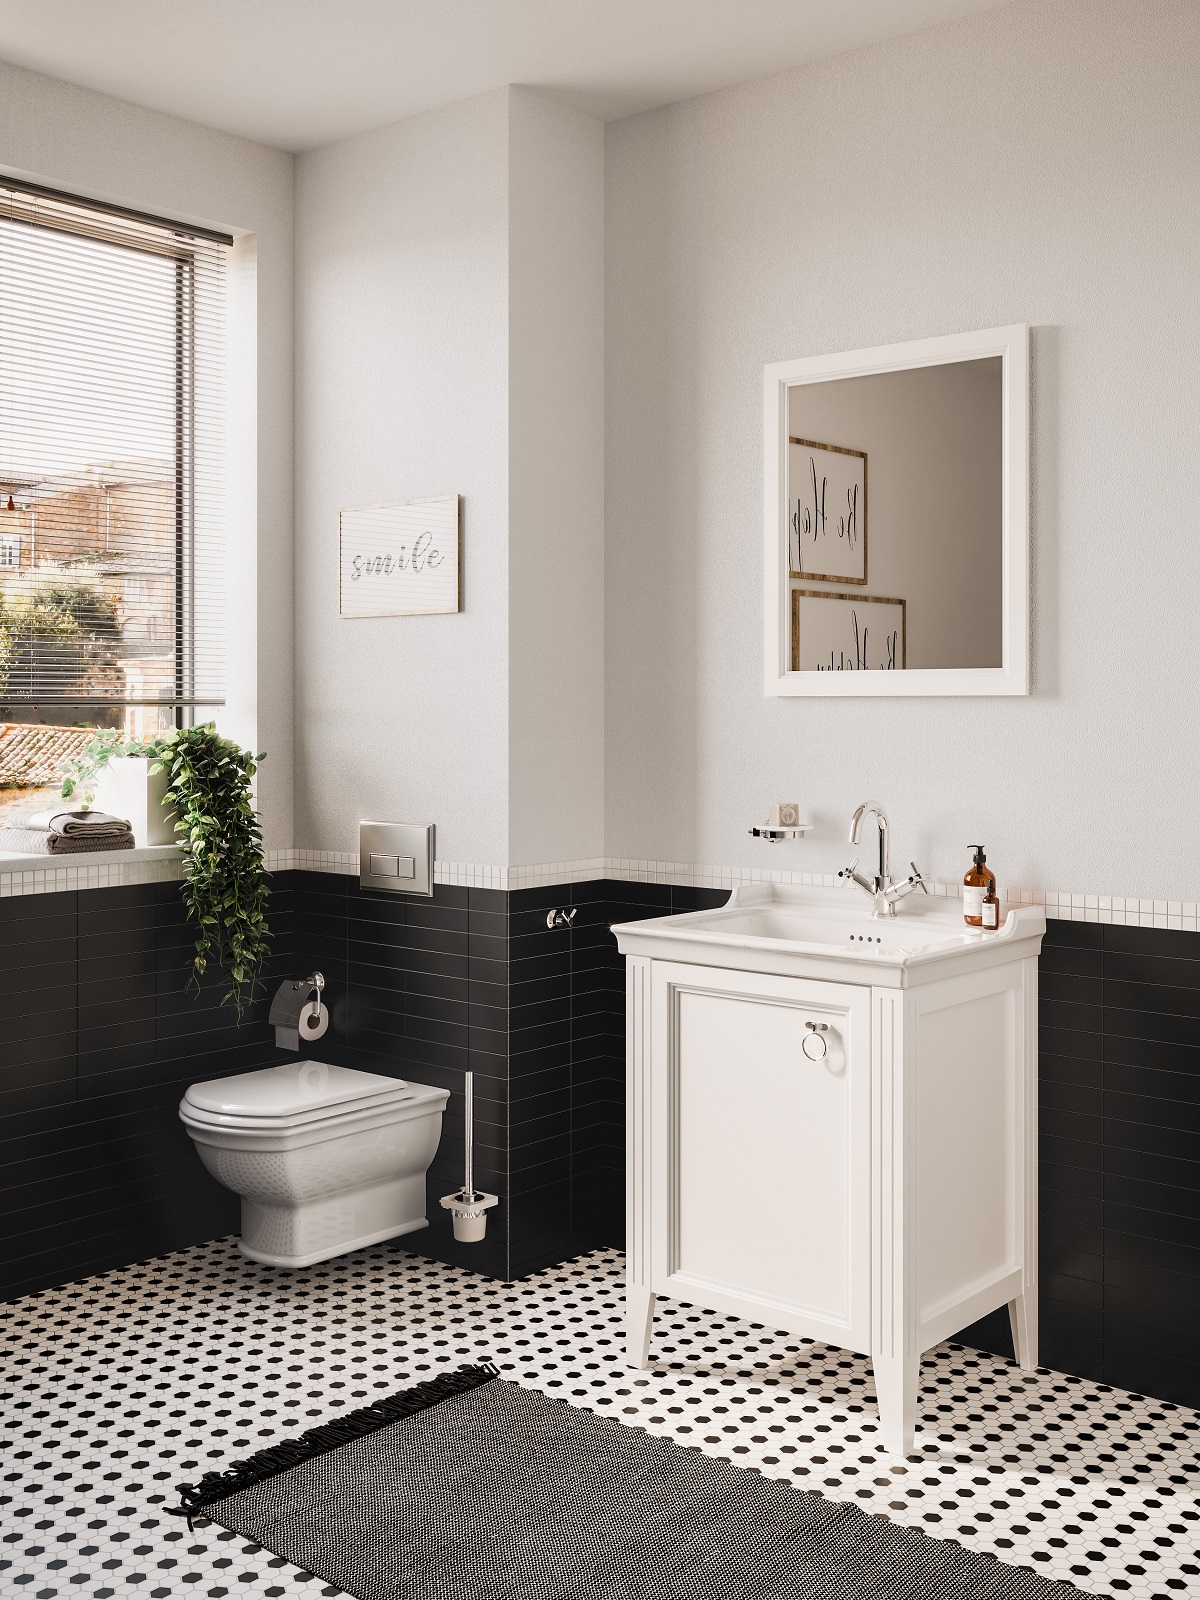 Lifestyle image of a bathroom with blakc and white hexagonal floor tiles, a black and white bath mat and black rectangular wall tiles contrast against white fixtures